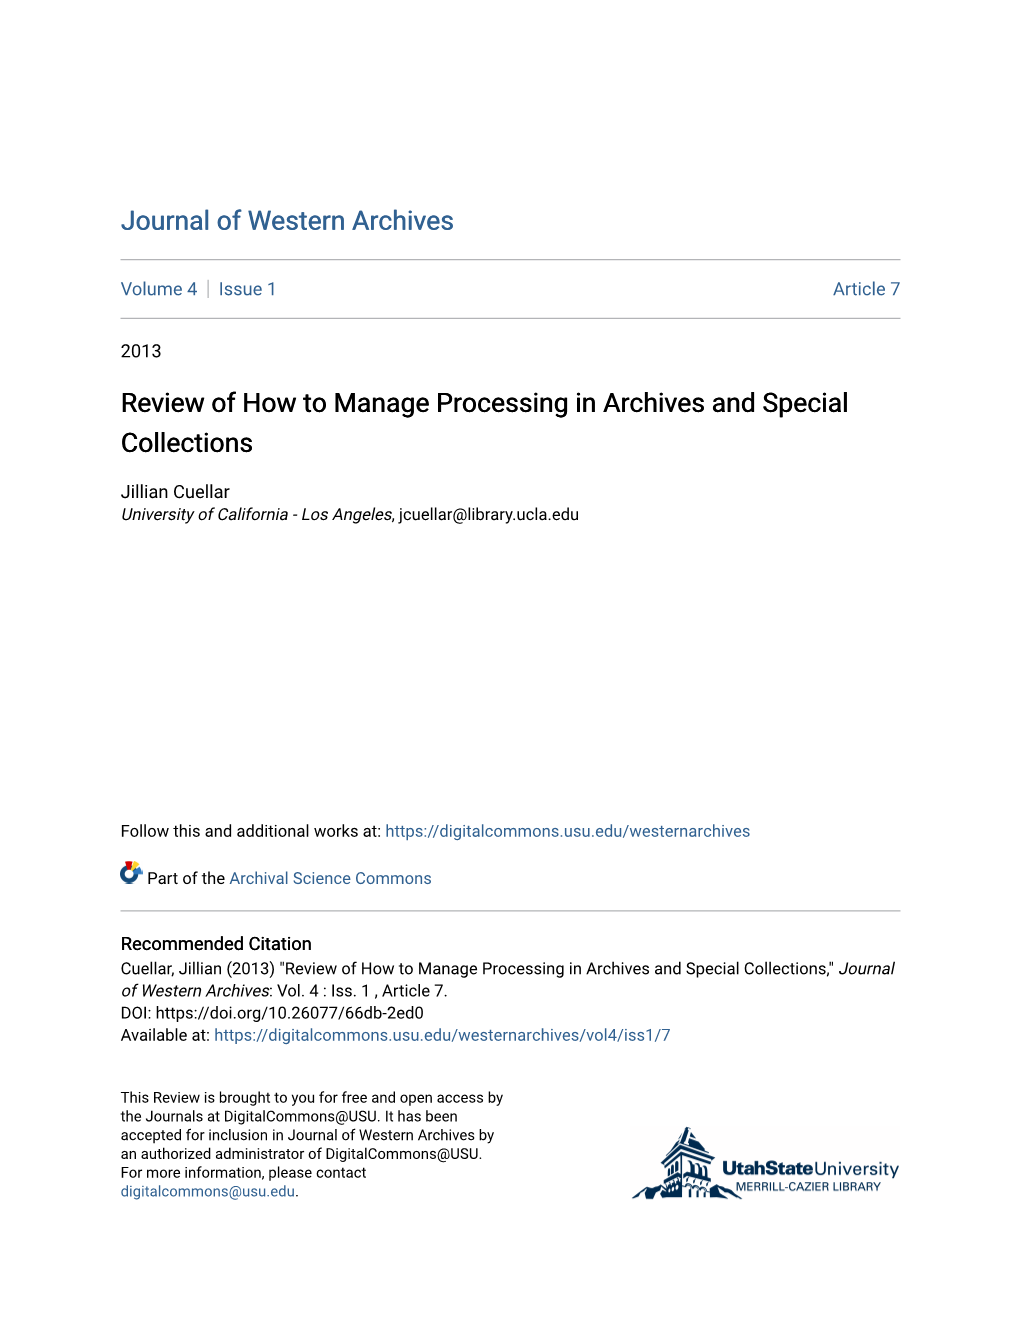 Review of How to Manage Processing in Archives and Special Collections